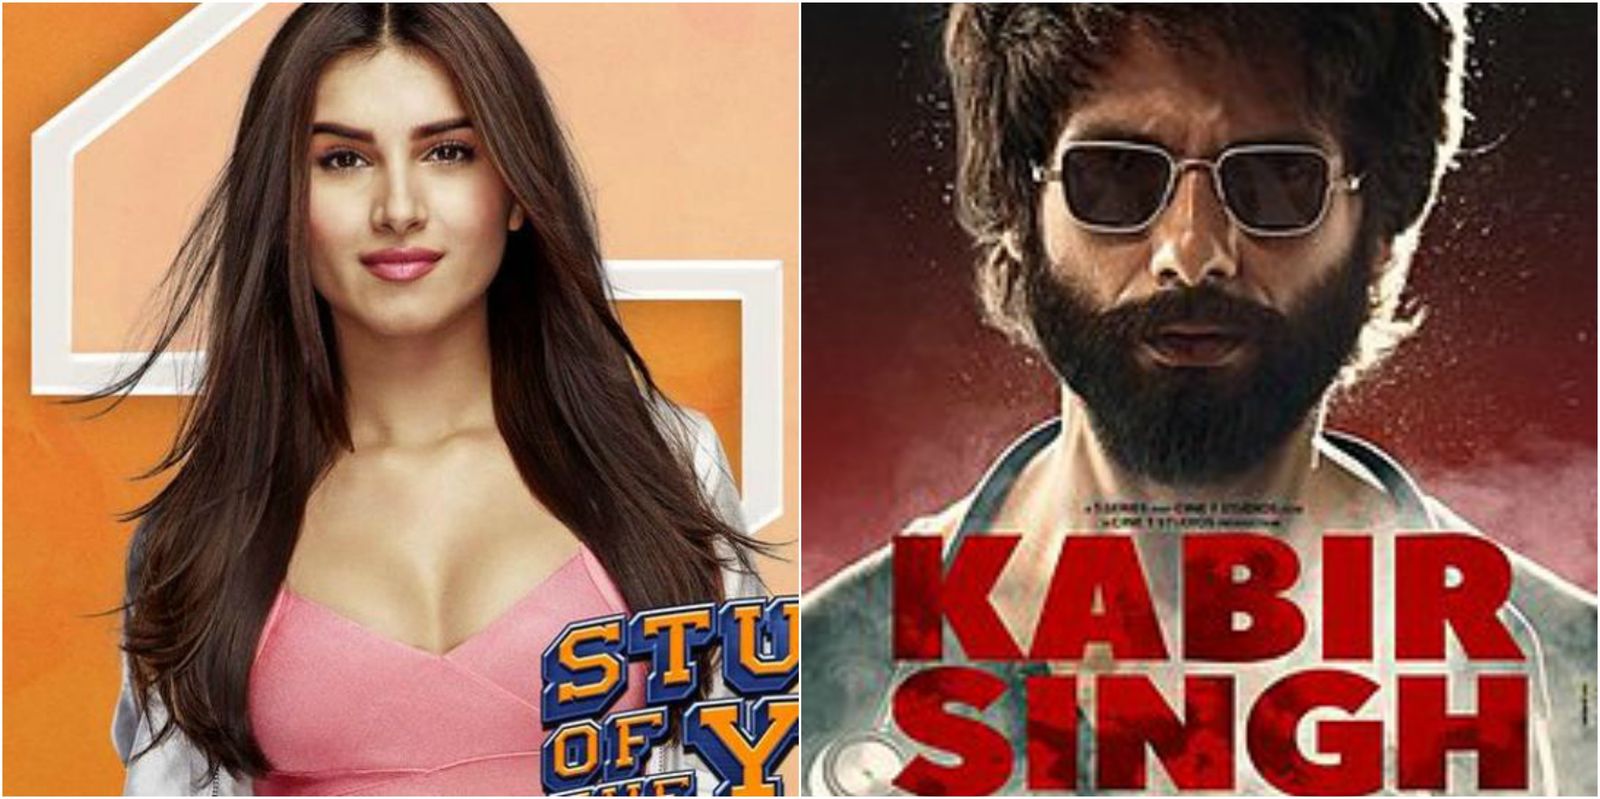 Not Just Aladdin, Tara Sutaria Said No To Kabir Singh As Well, Here’s Why